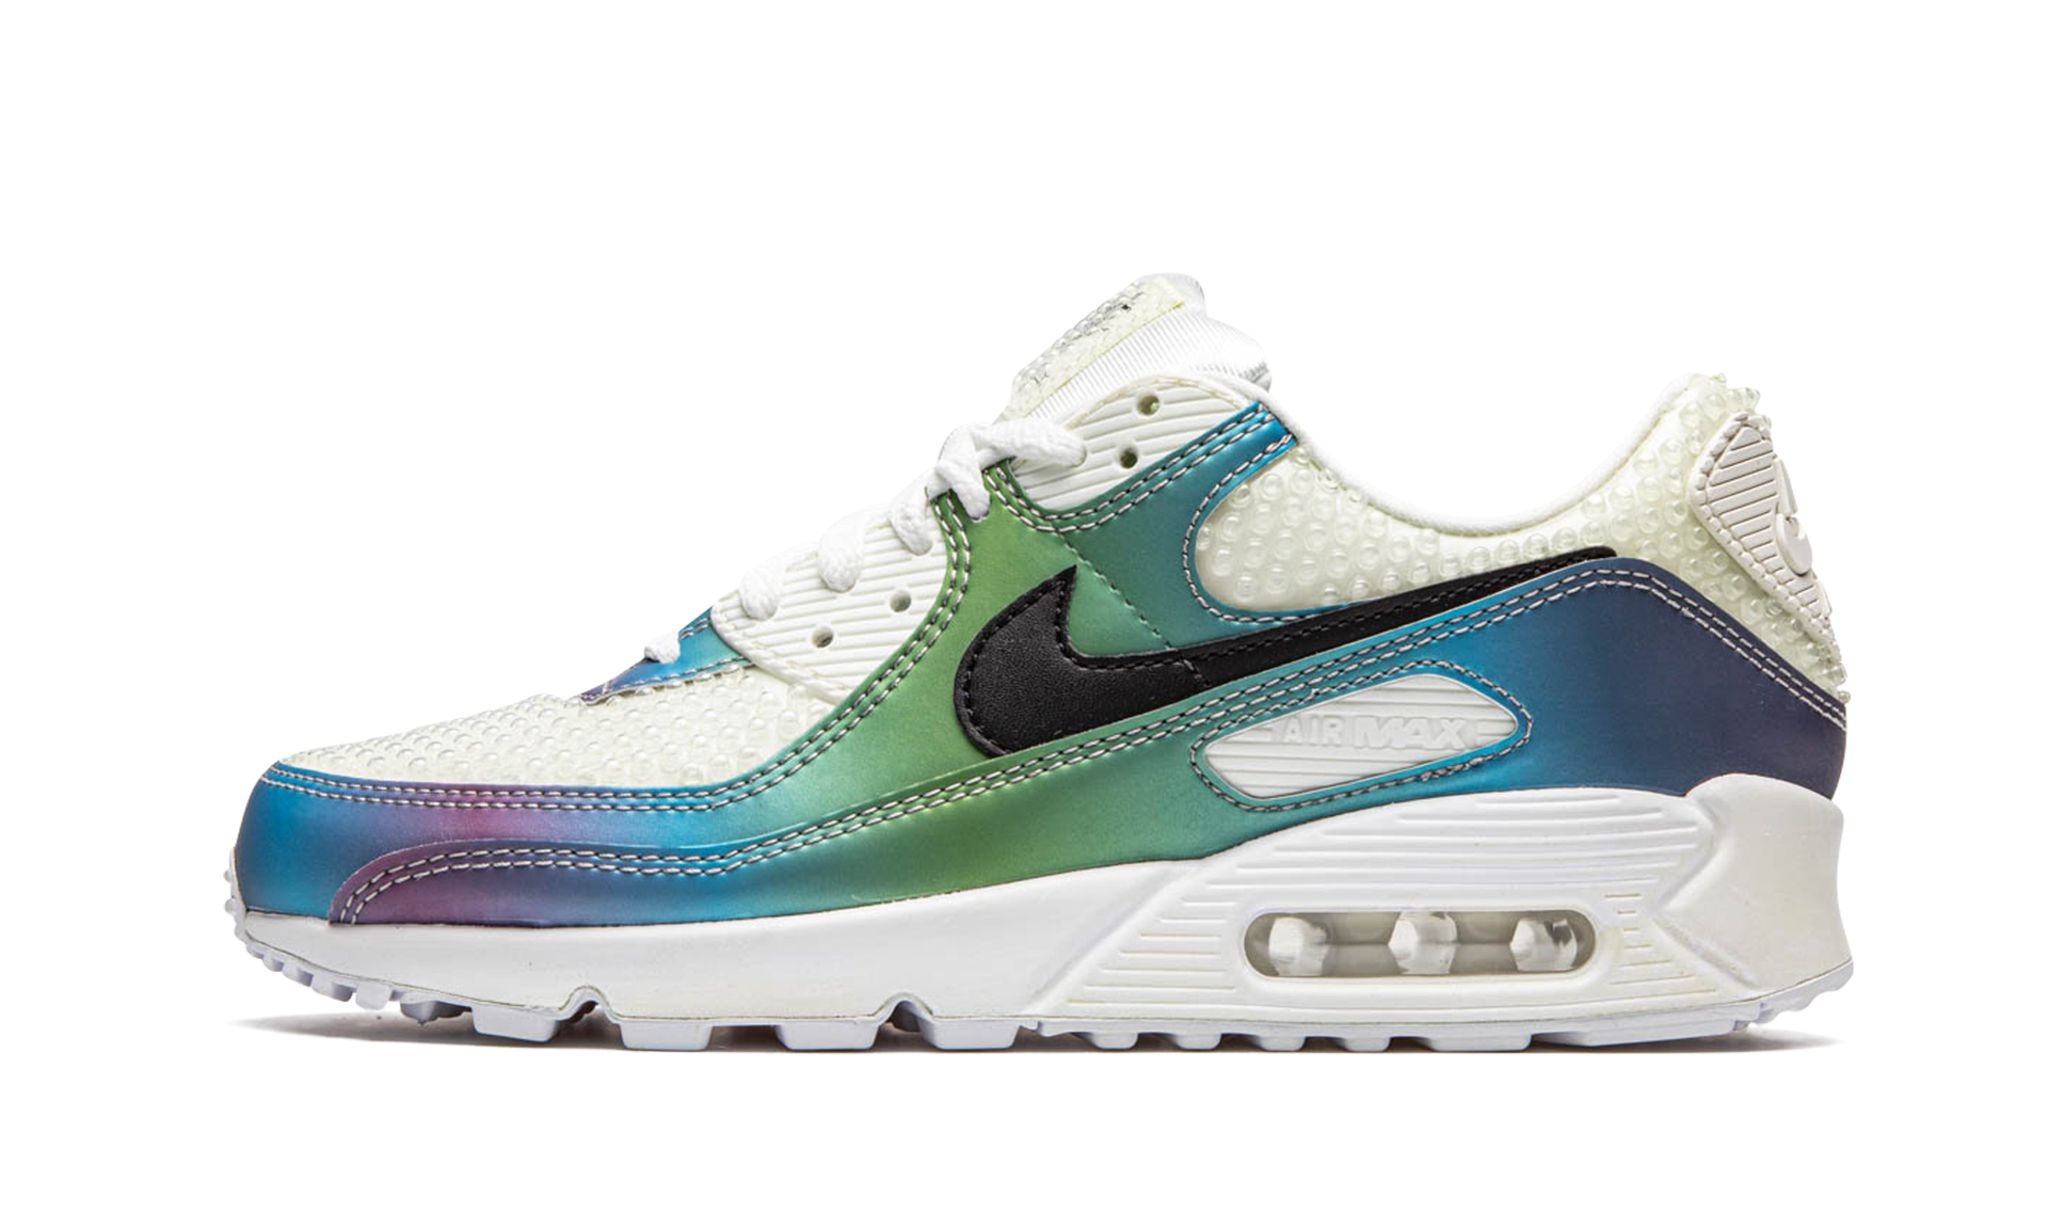 Air Max 90 "Bubble Pack" - 1